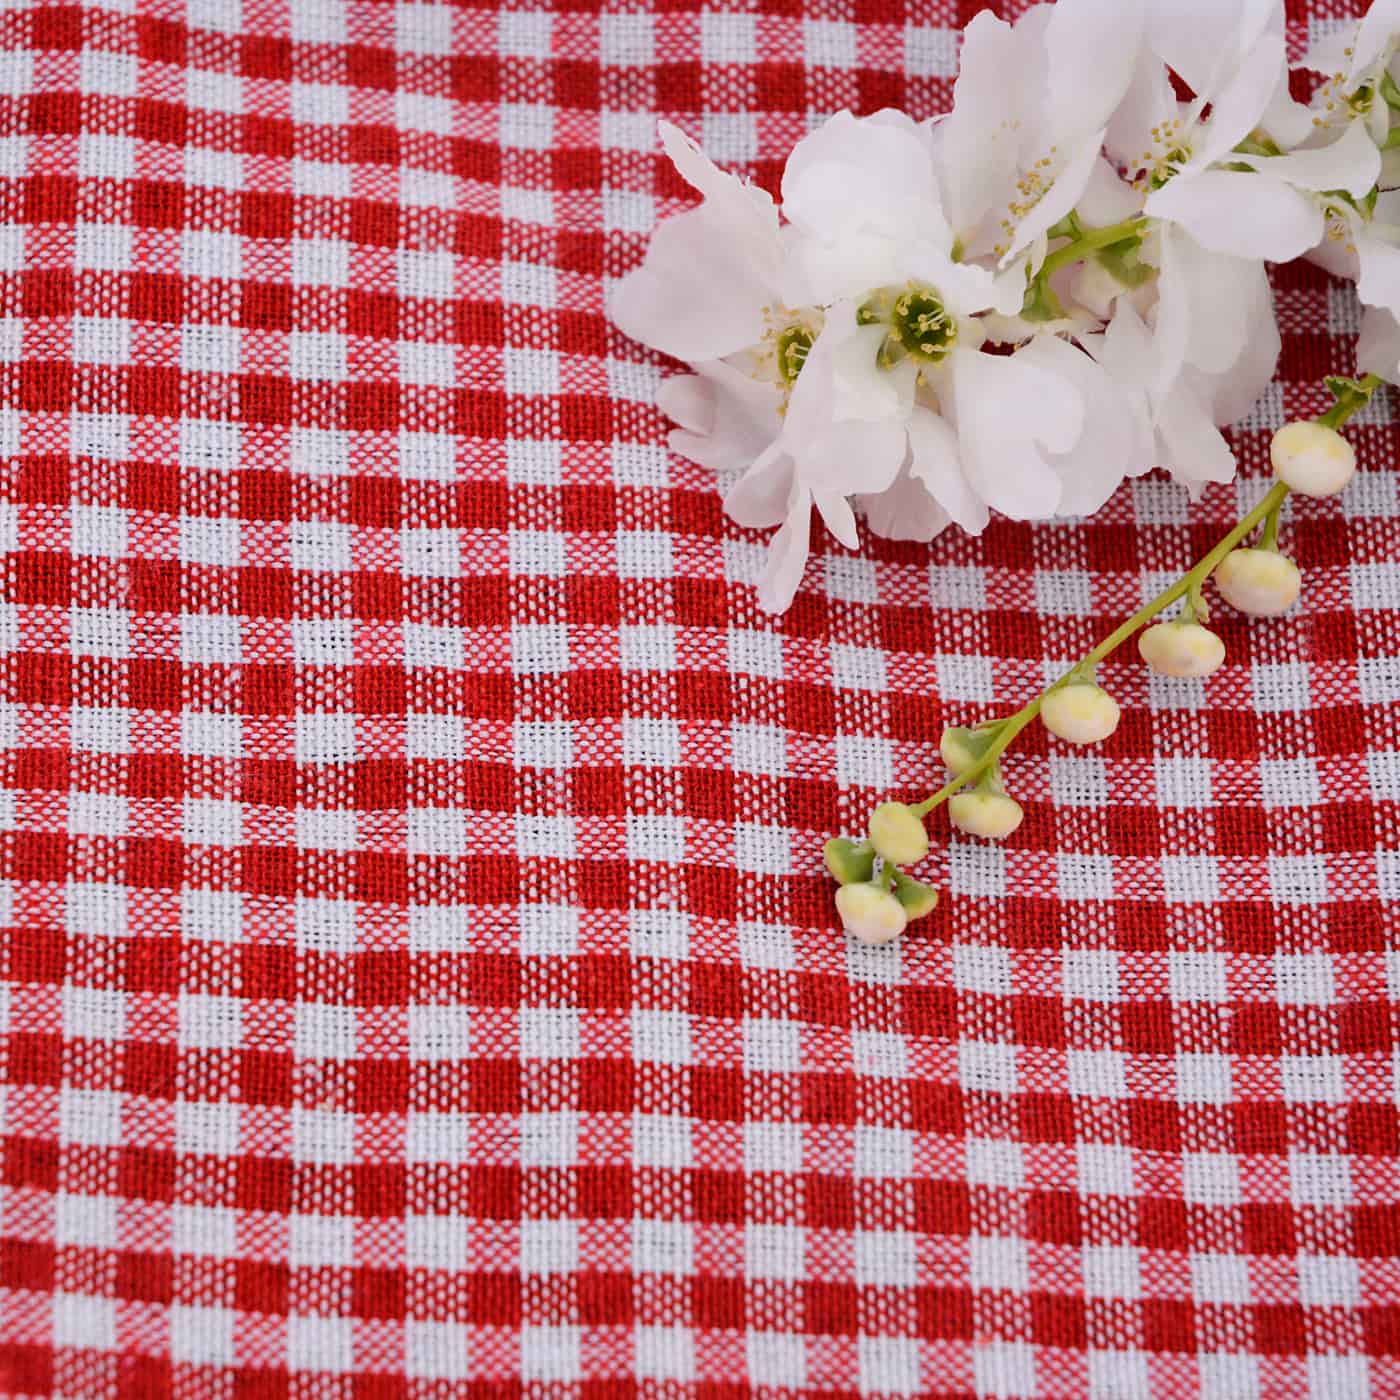 Waterproof picnic blanket red and white gingham XL